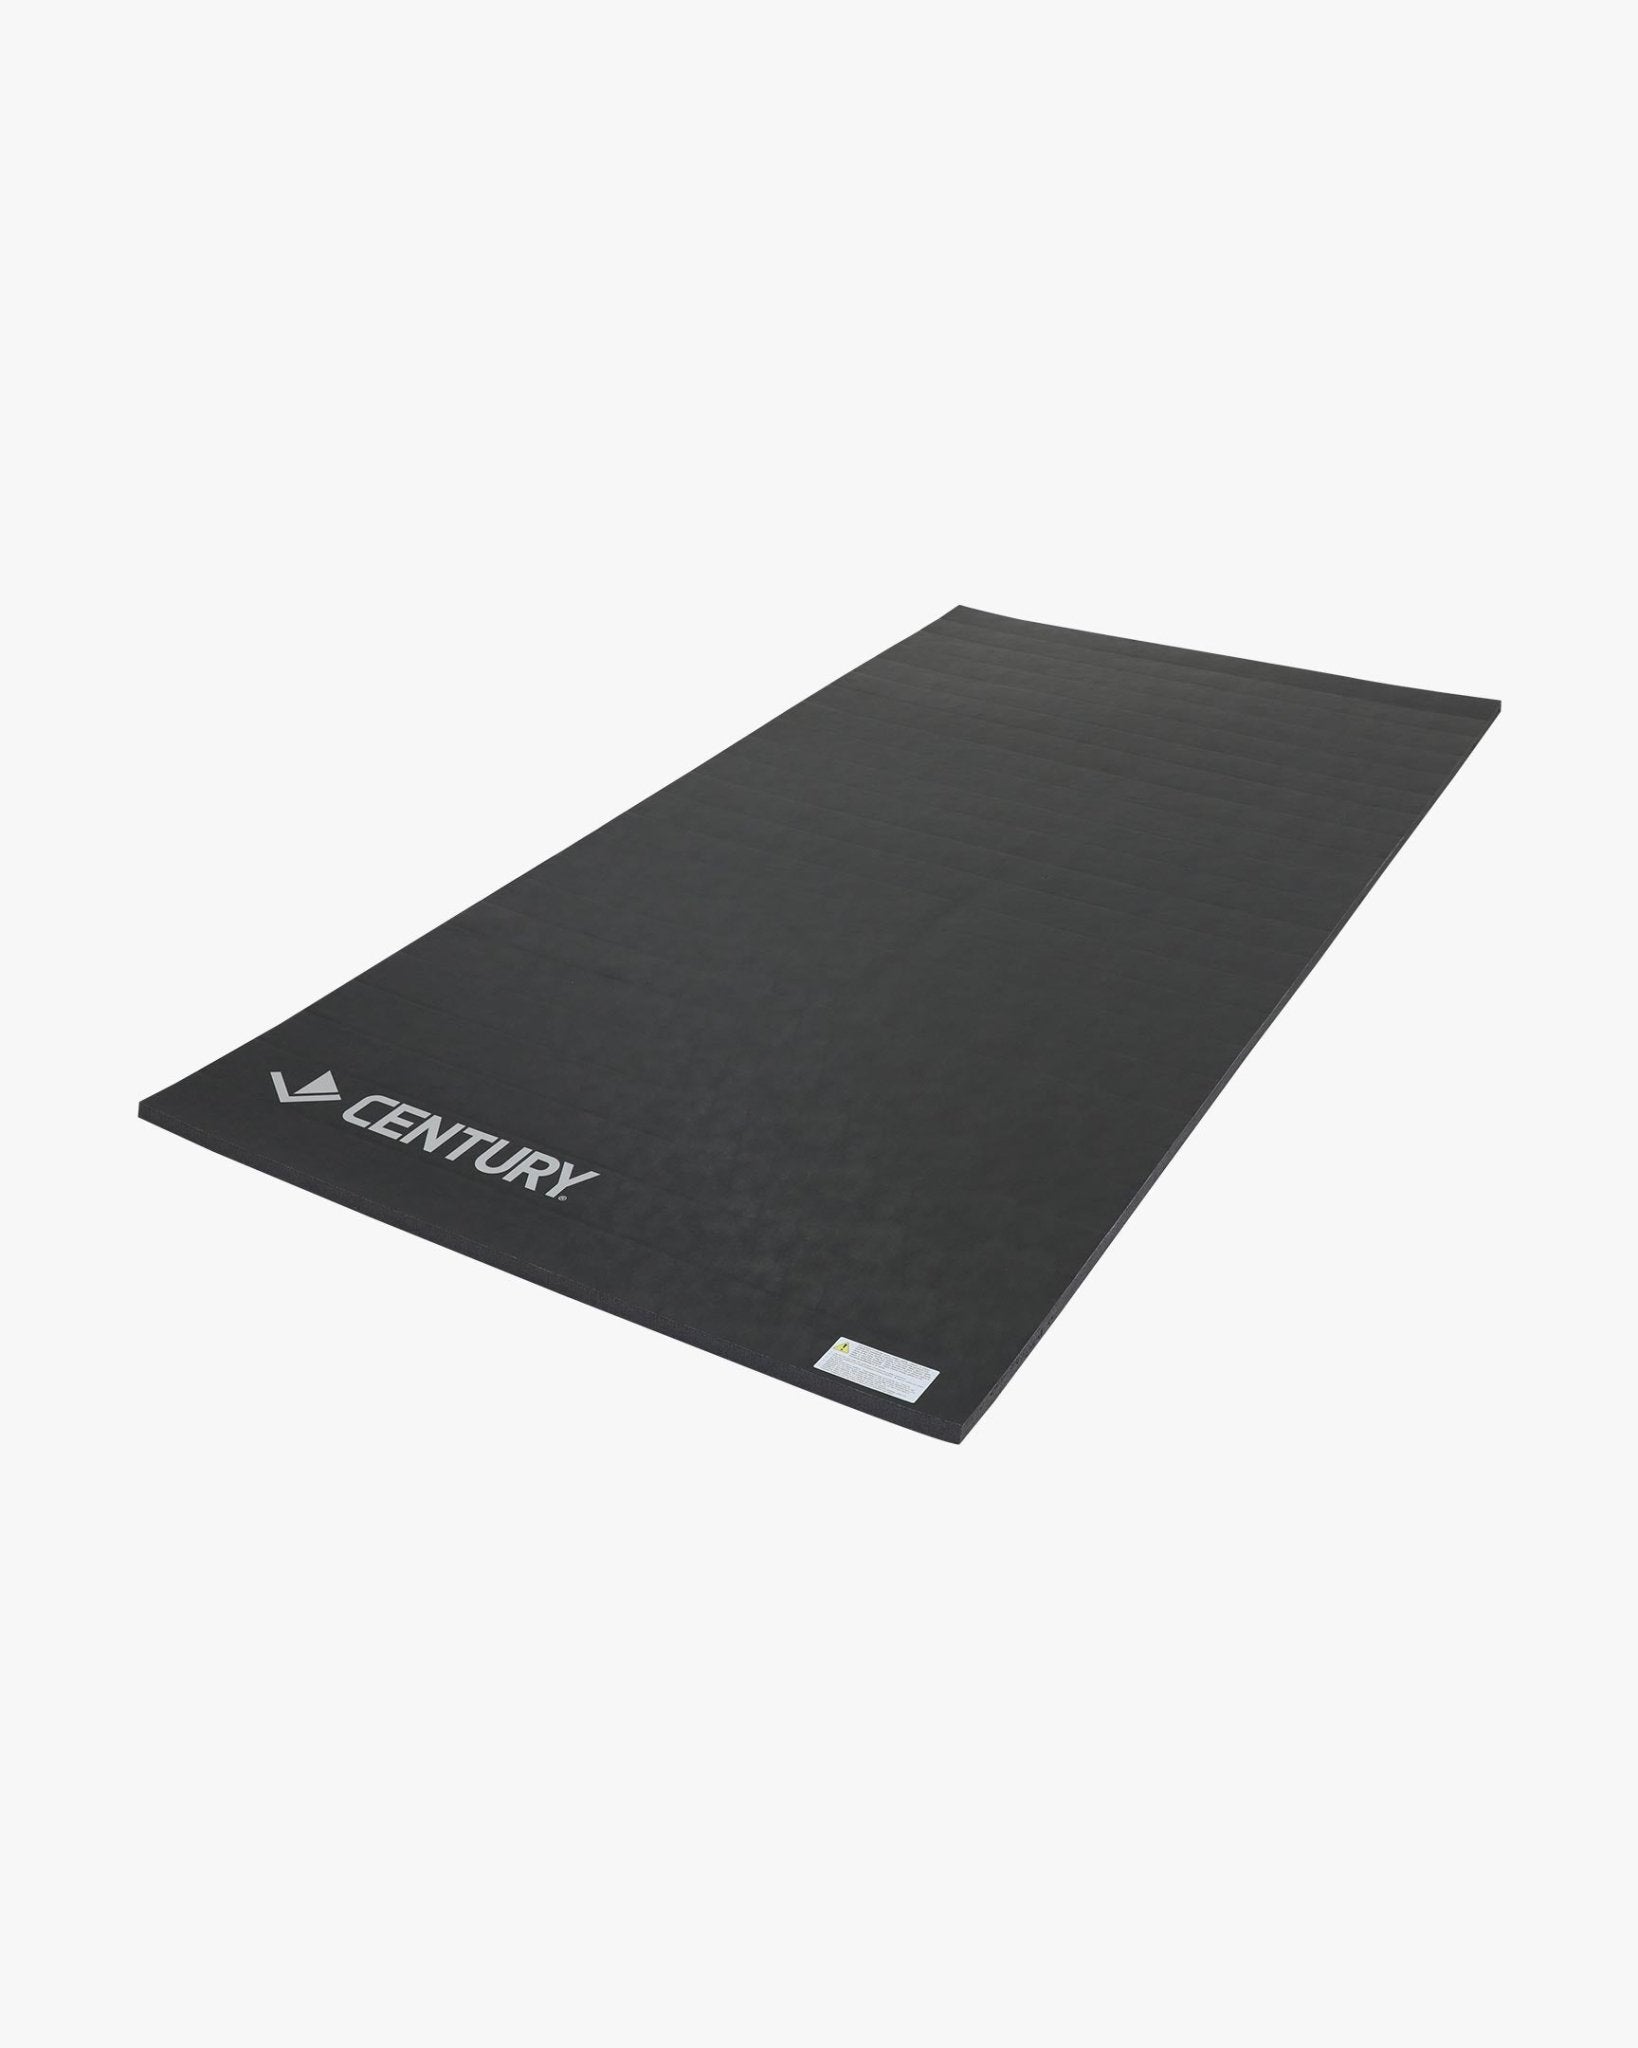 Custom Rollout Mat - 1" Thick Black